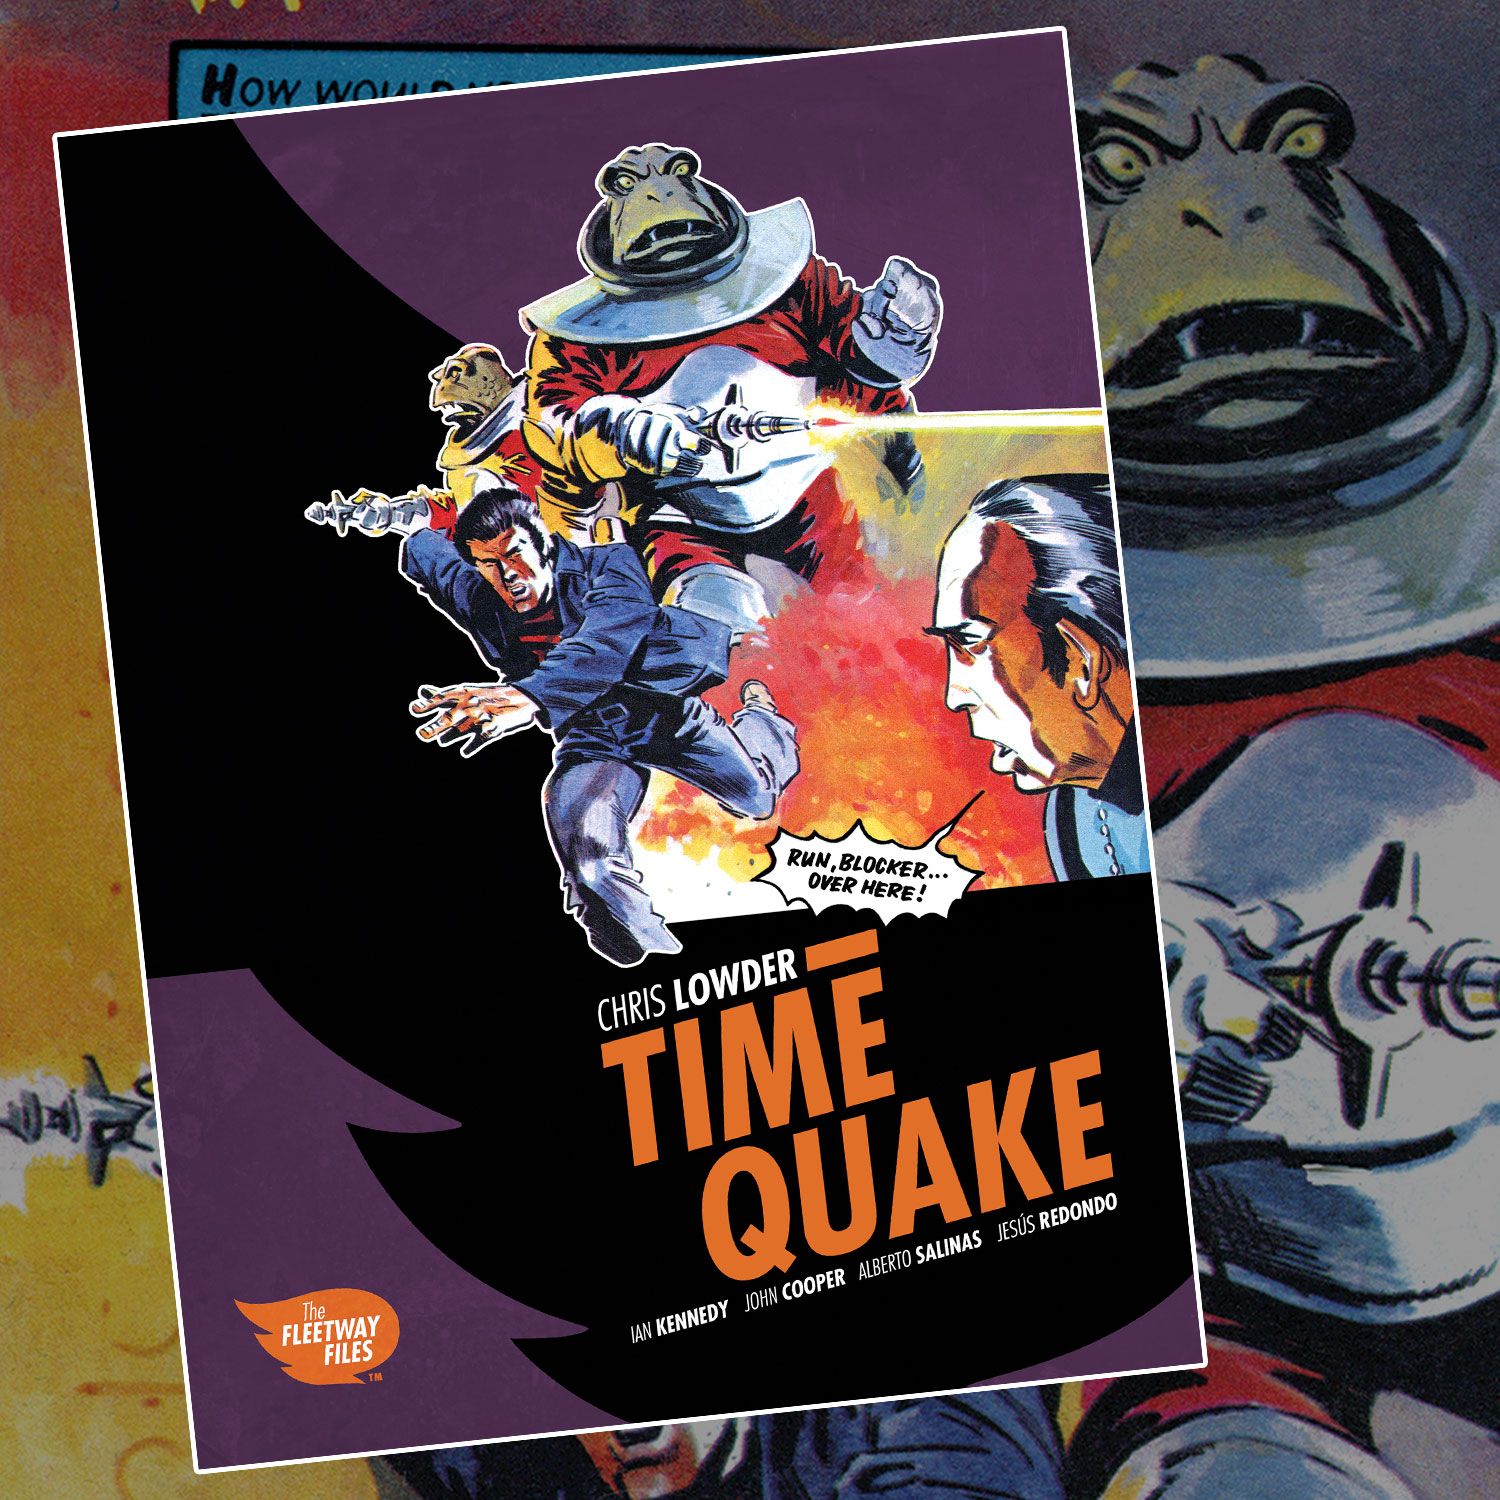 ‘TimeQuake’ from Starlord & 2000 AD collection out now from Hibernia